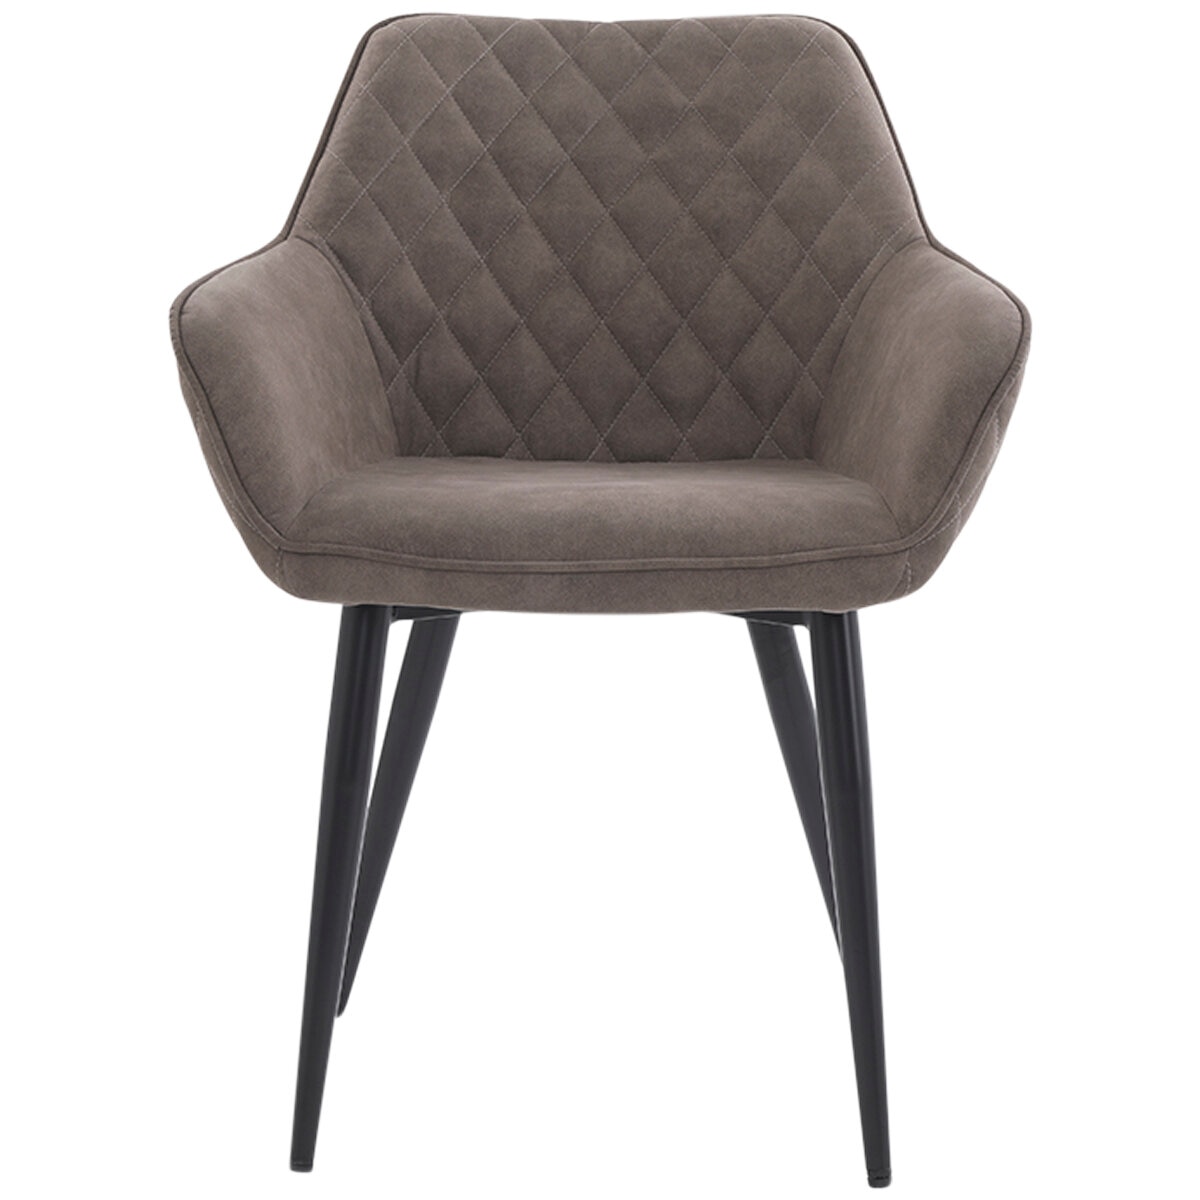 142279-Onex RiVa Dining Chair Brown